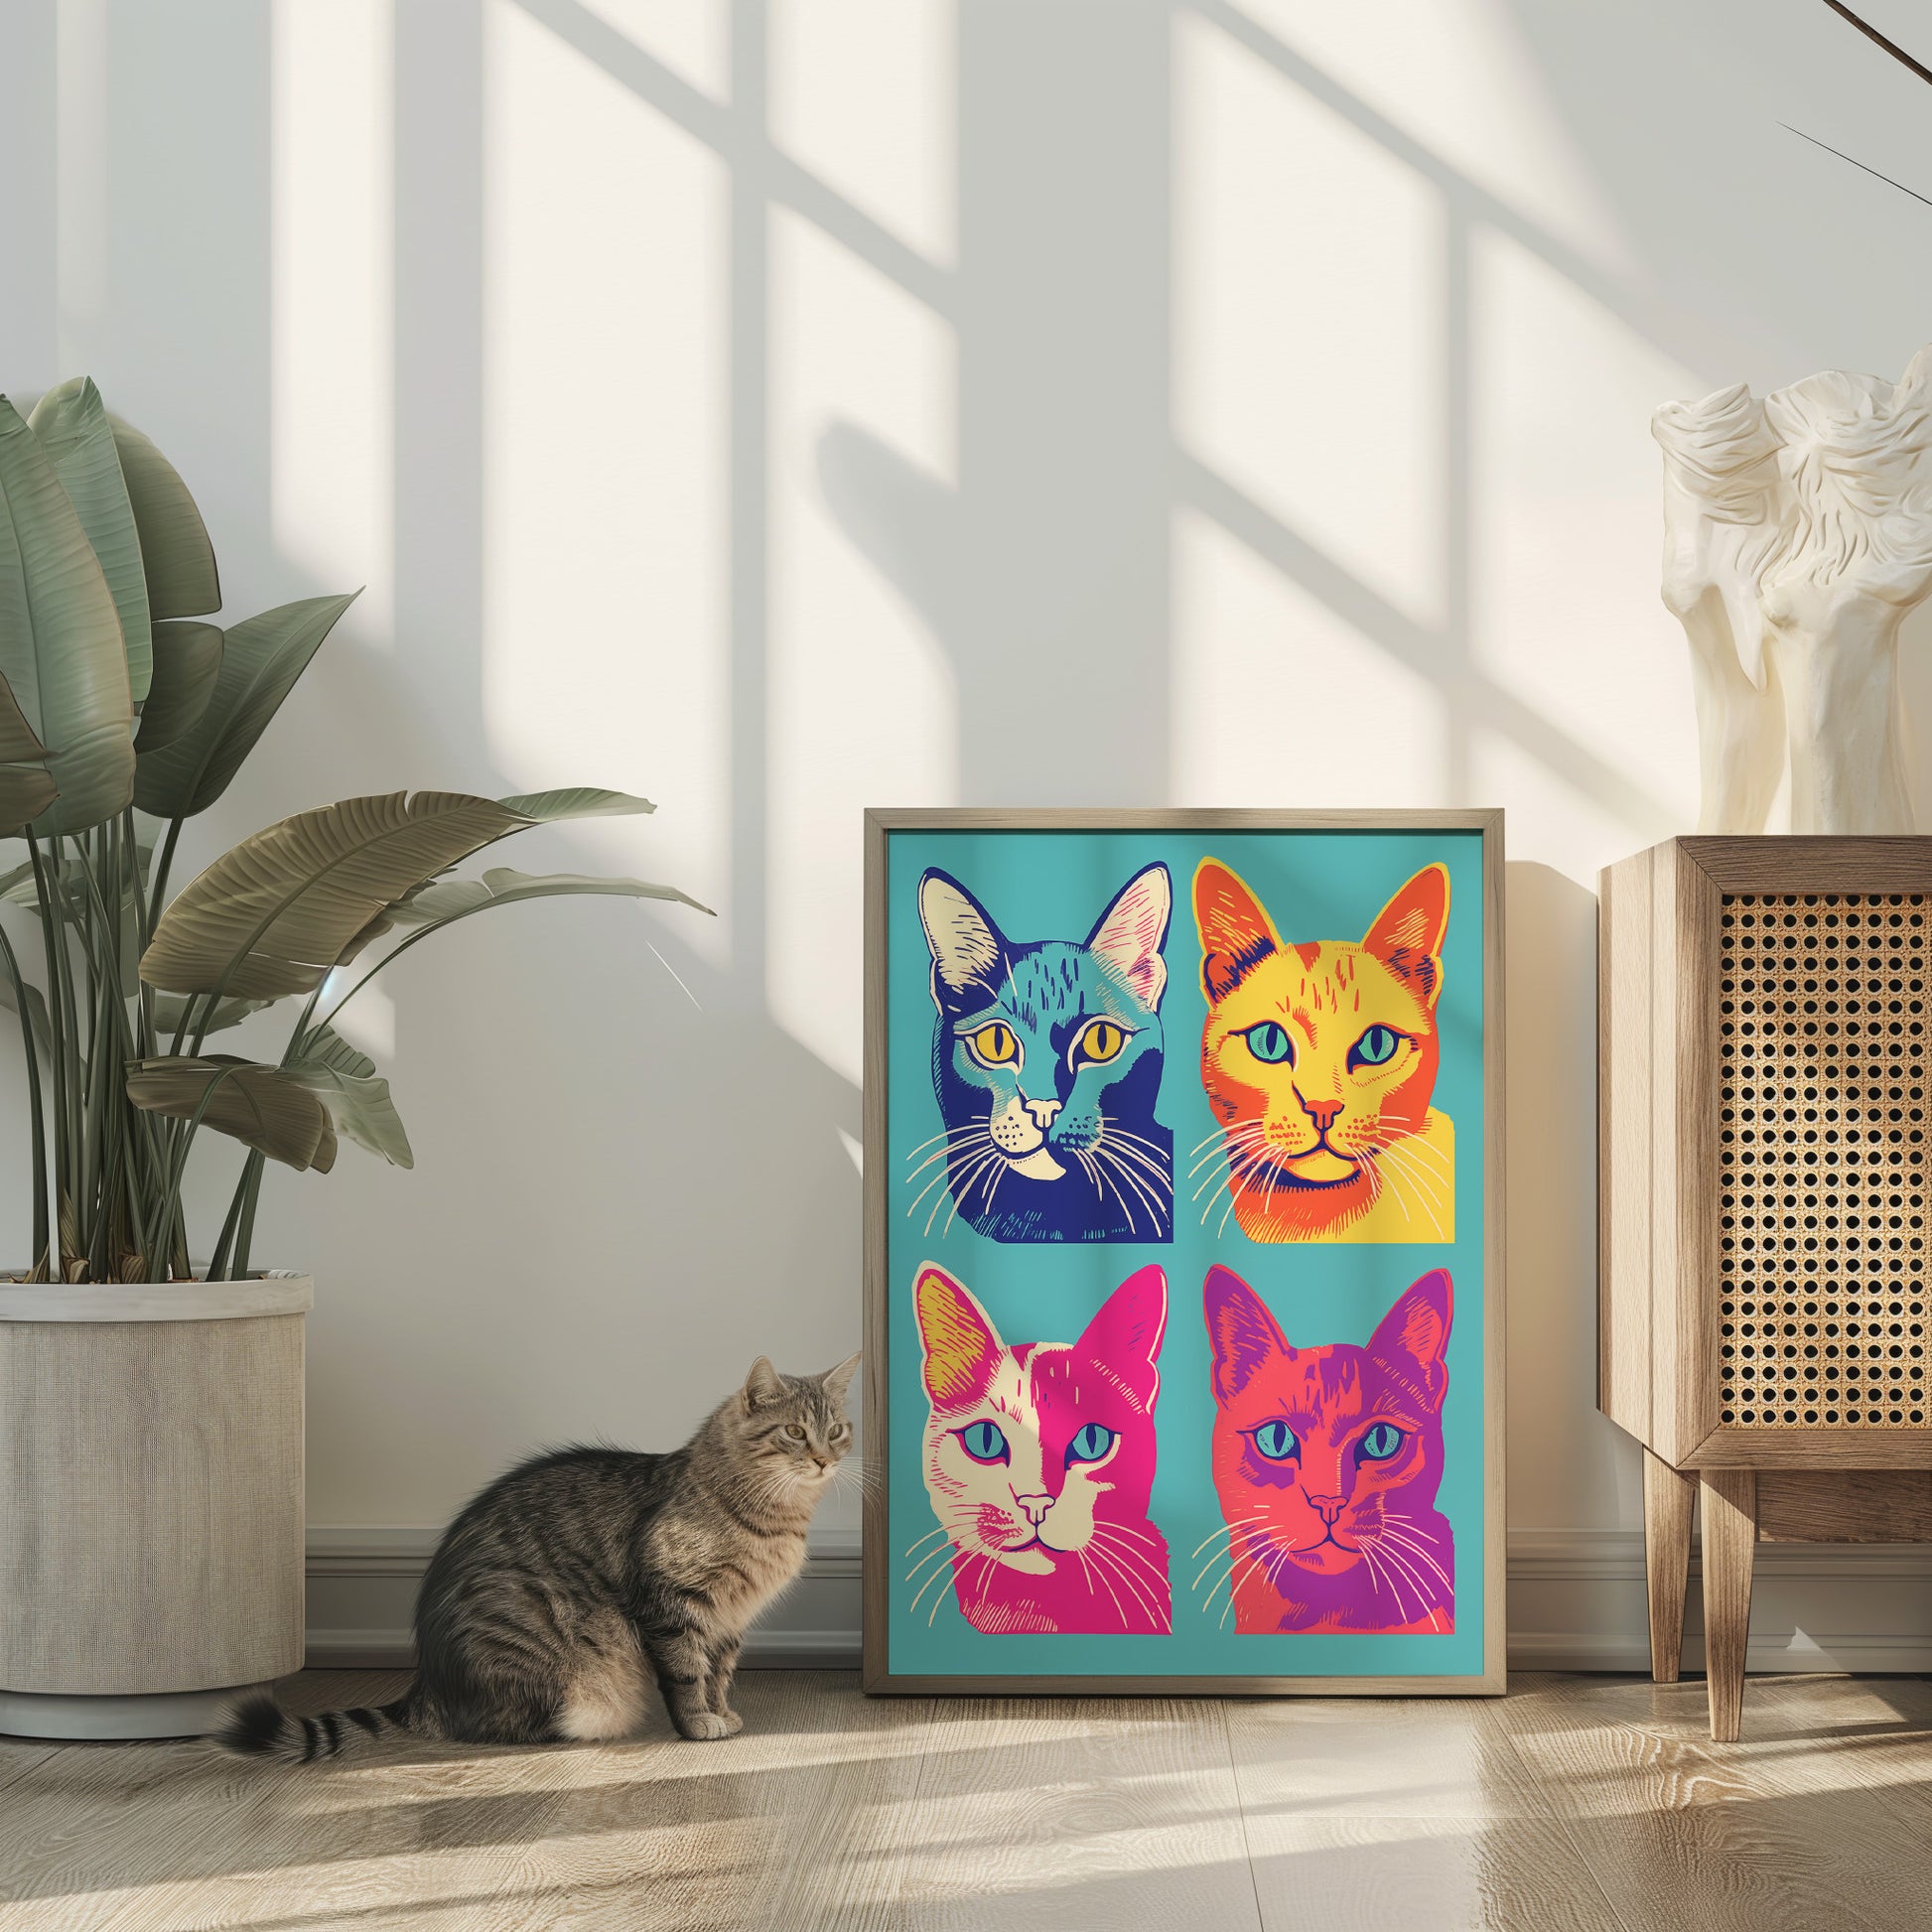 A cat looking at a colorful pop art-style portrait of four cats on a wall.